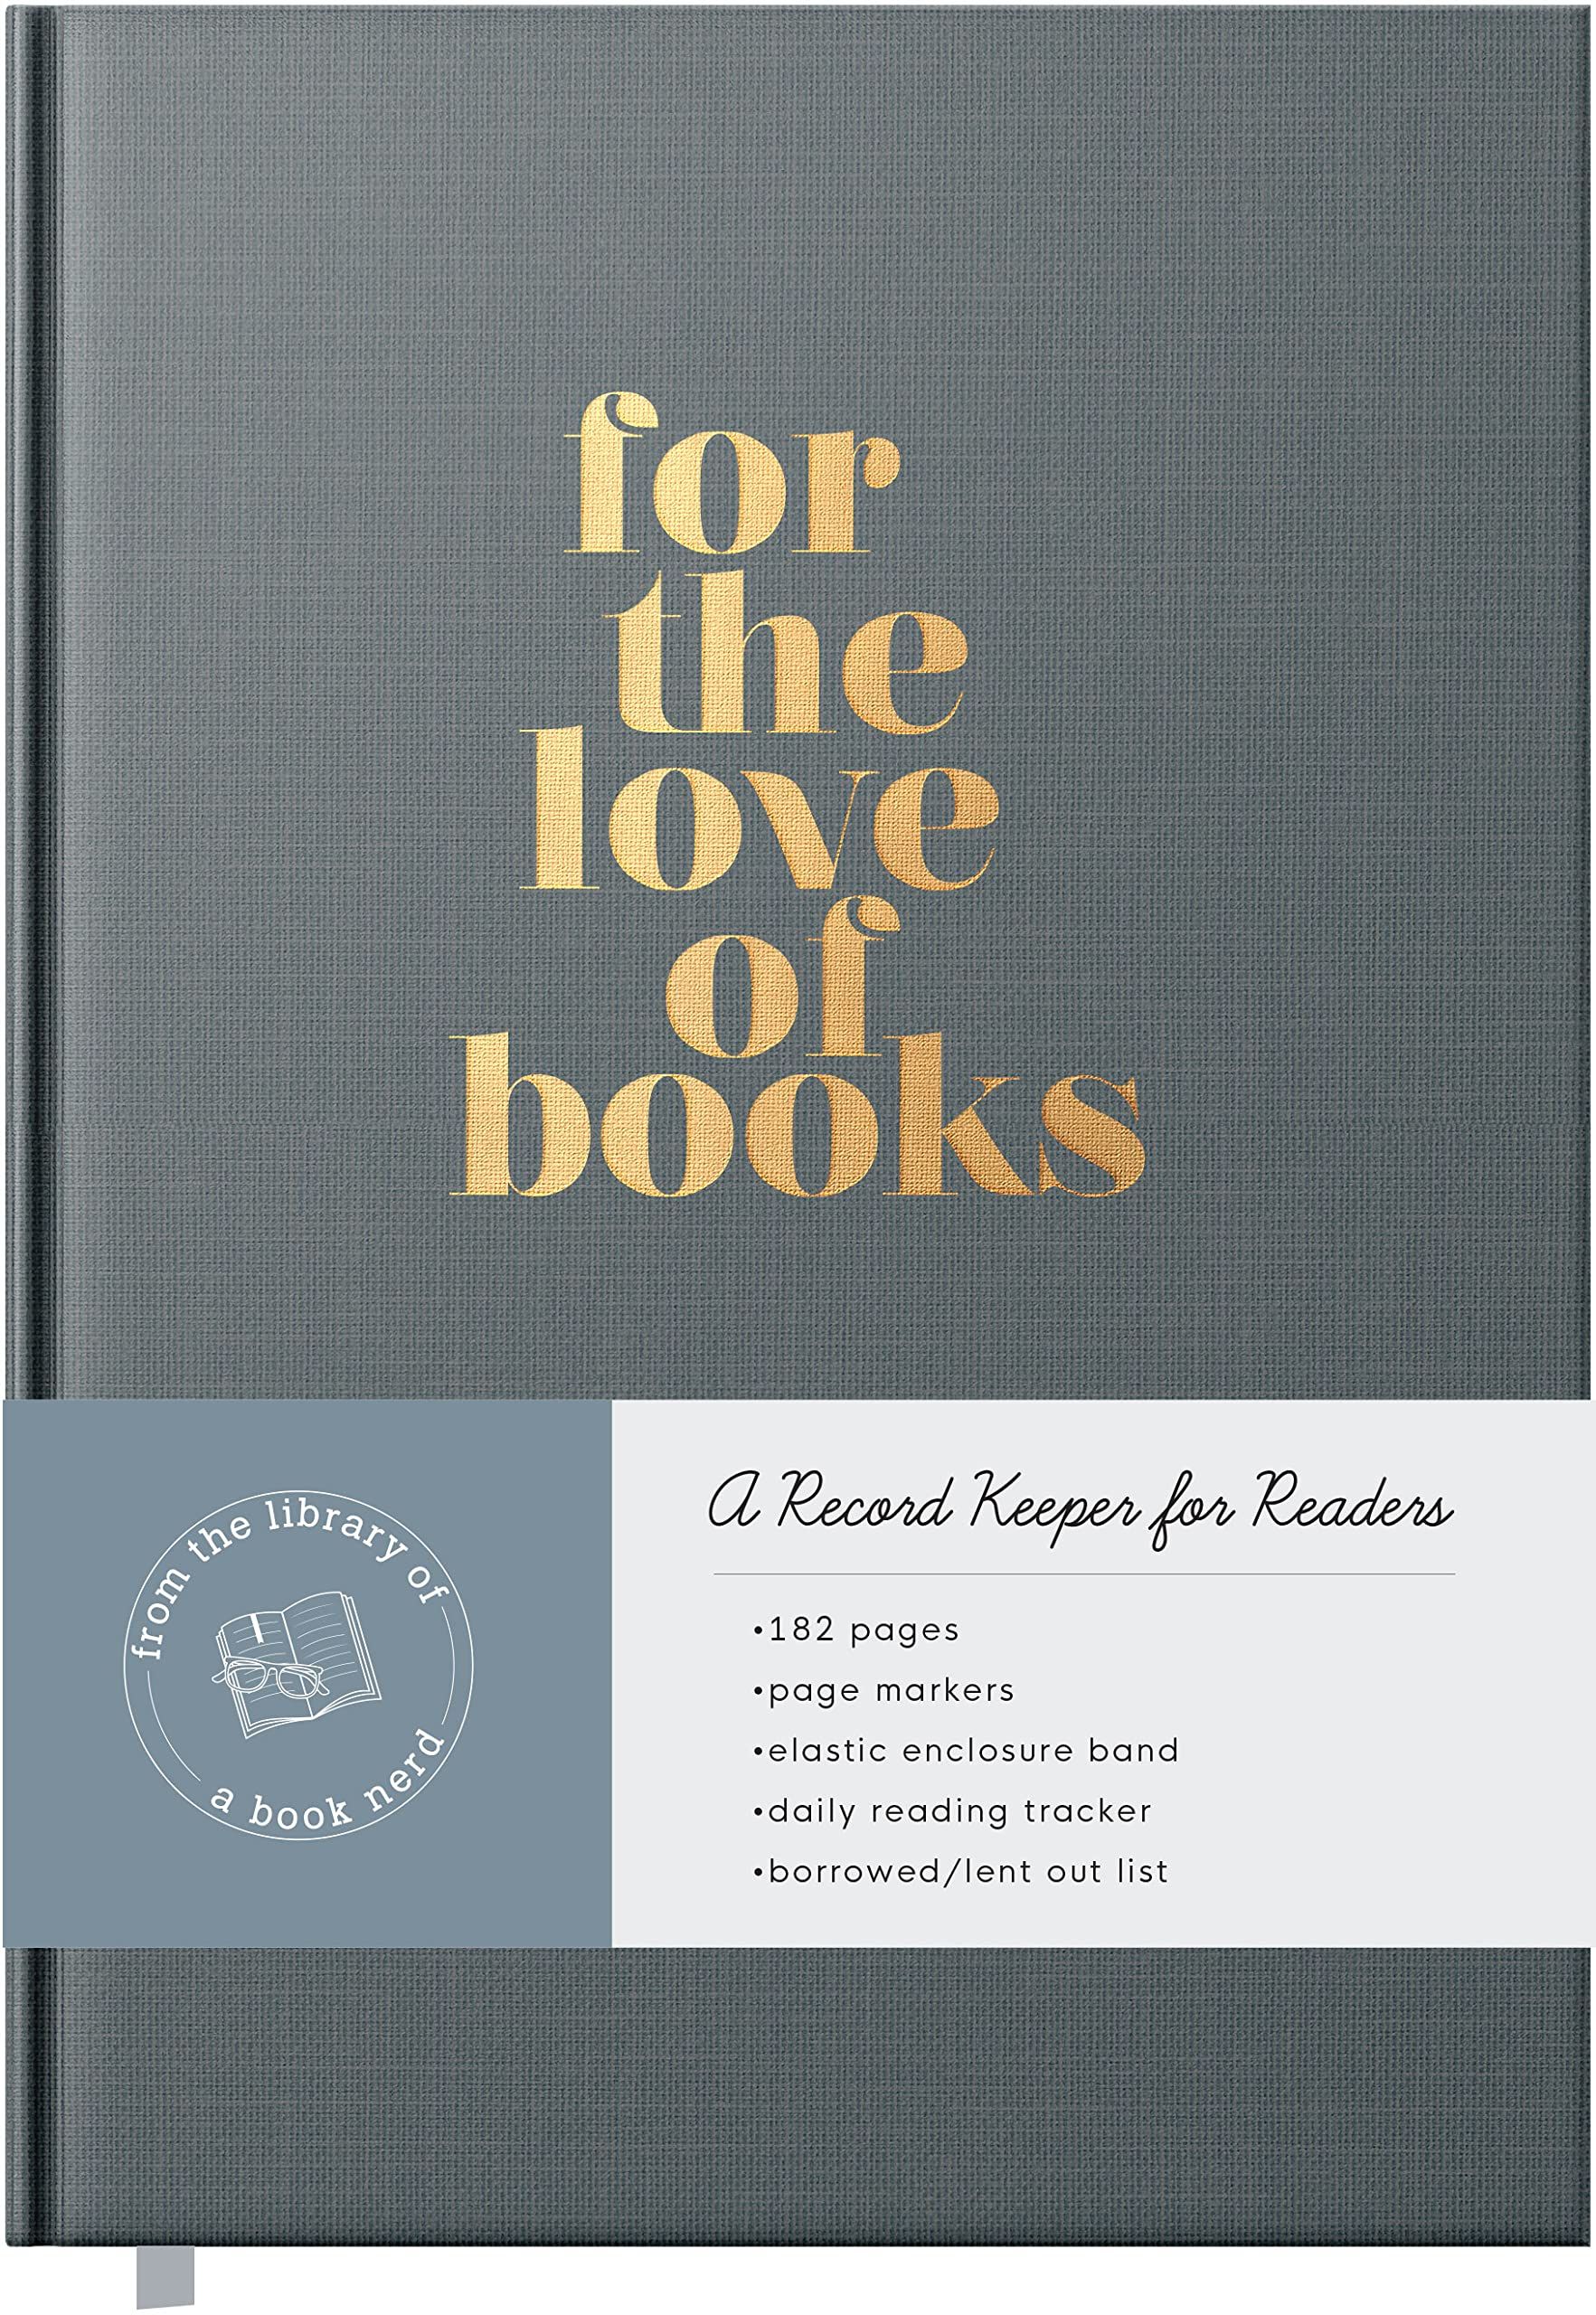 Book journal cover. "for the love of books" is written in golden letters on black.